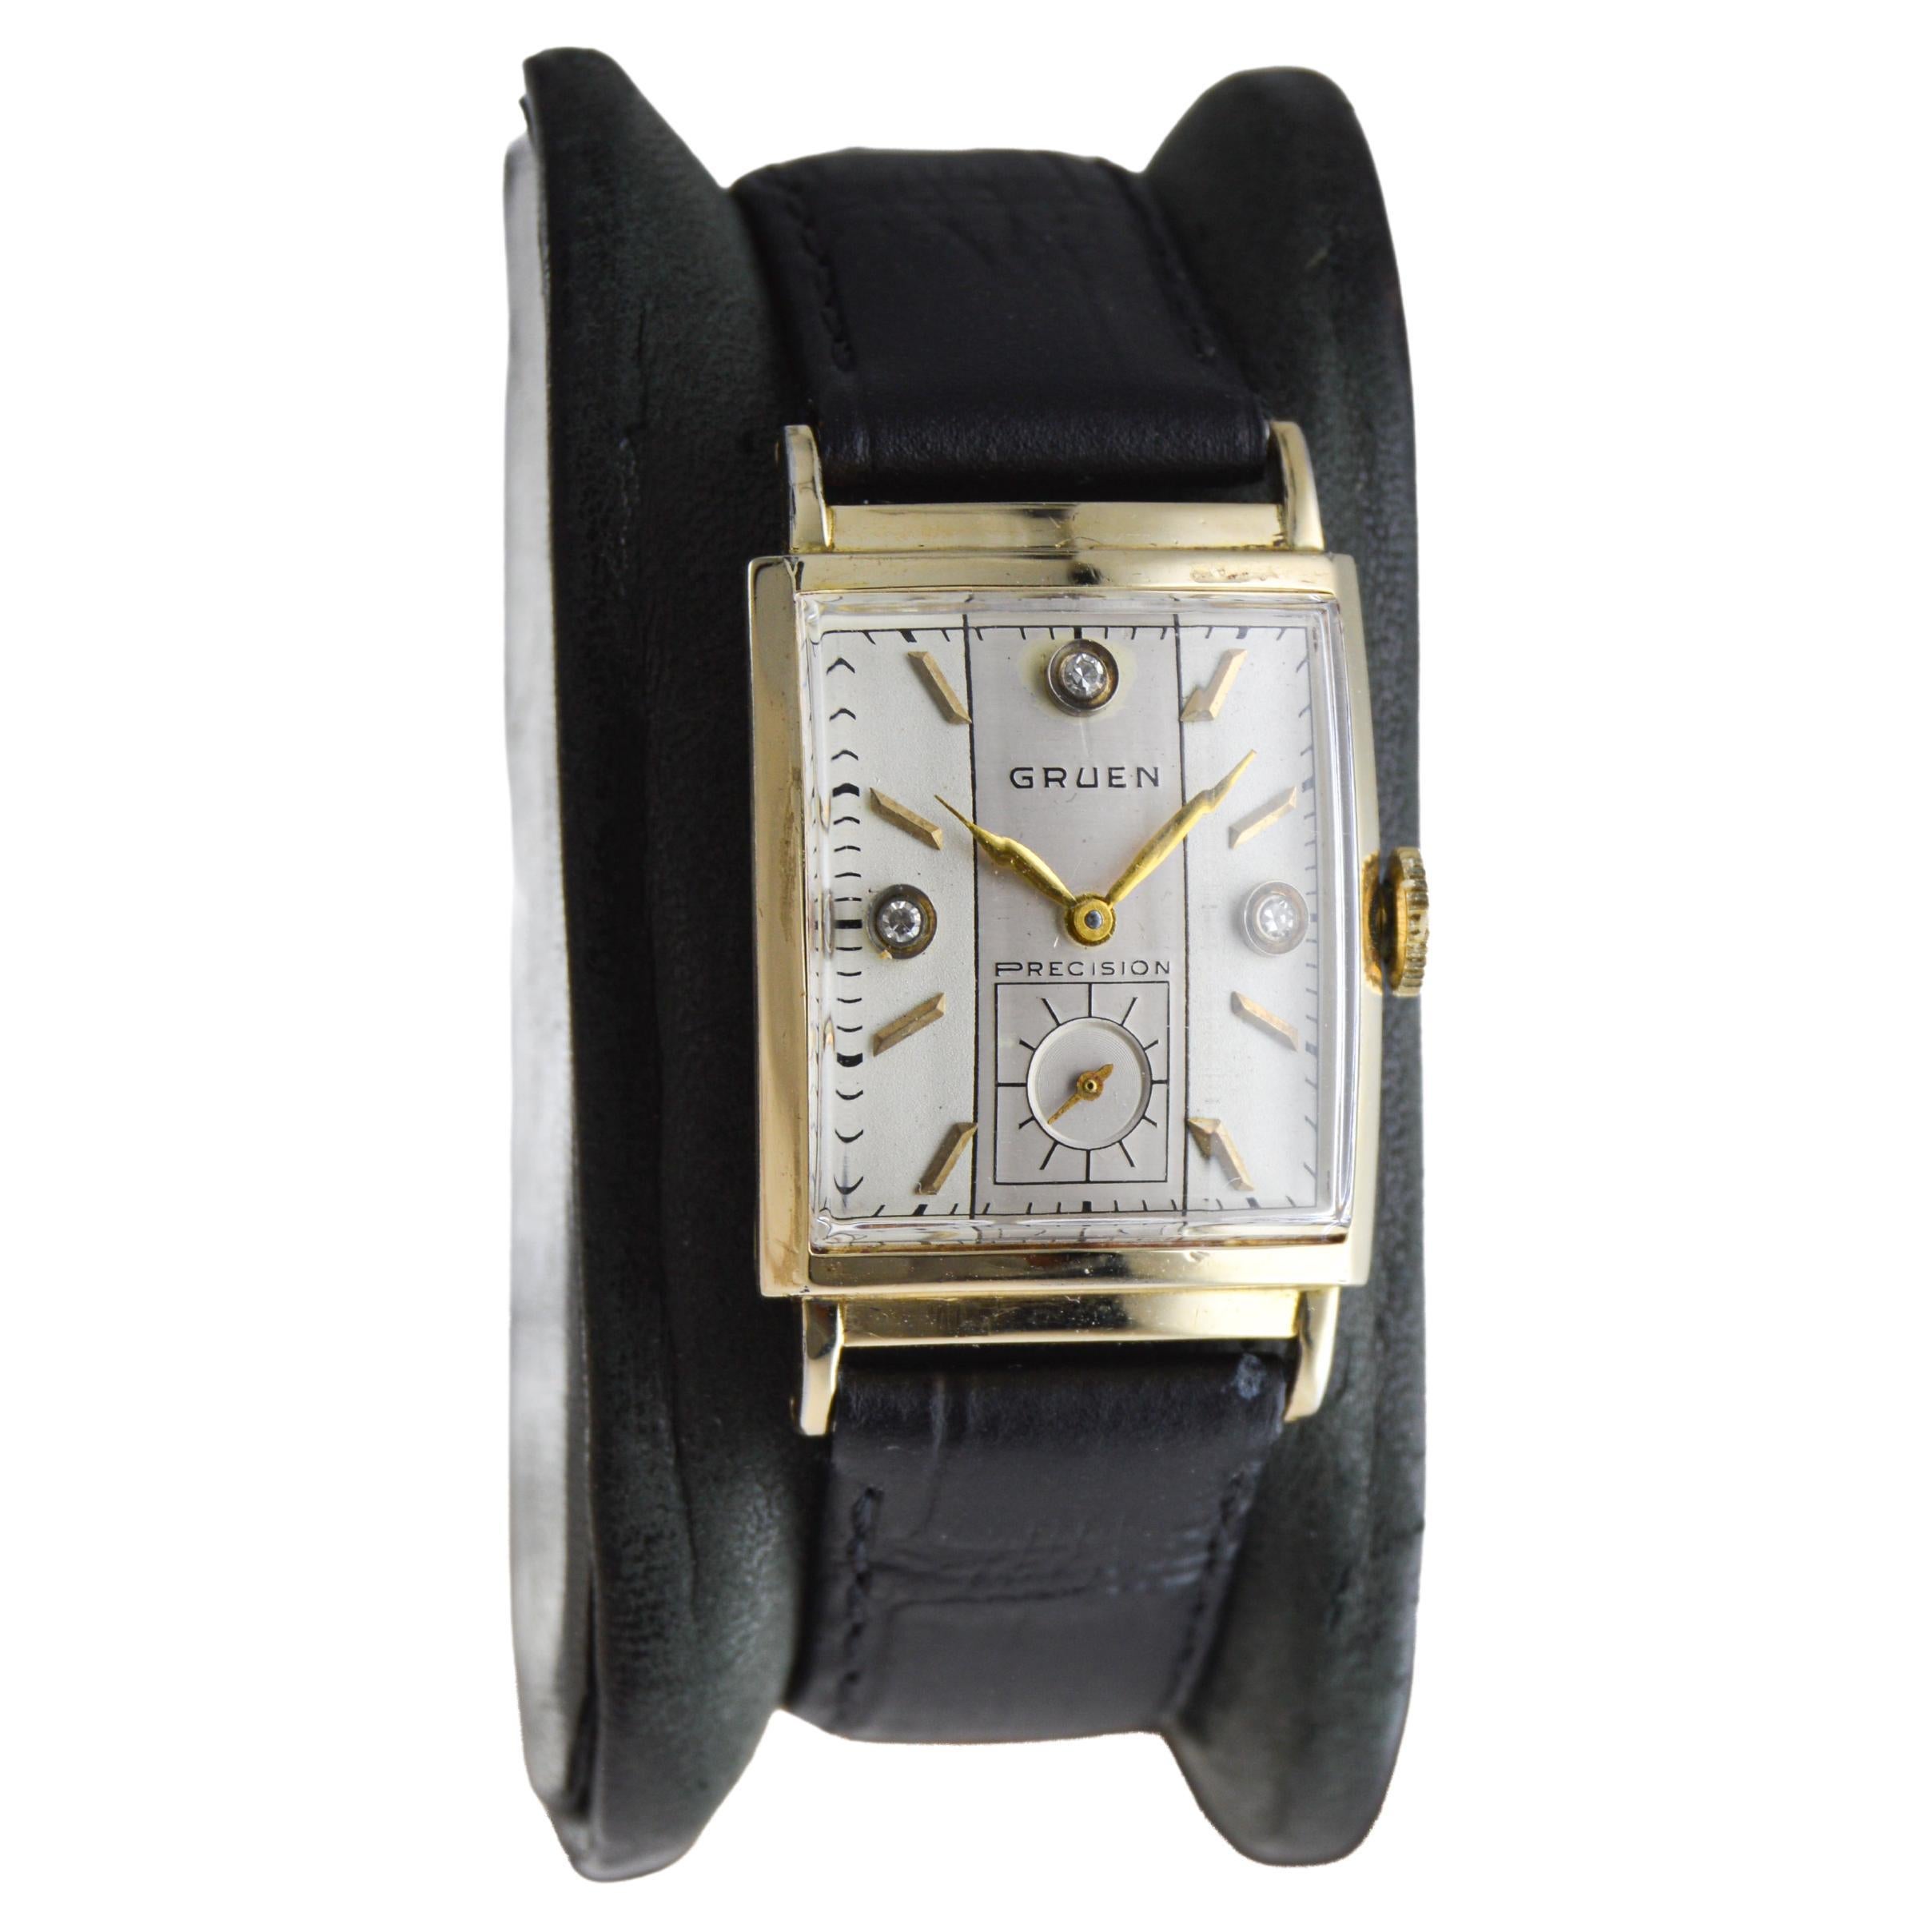 FACTORY / HOUSE: Gruen Watch Company
STYLE / REFERENCE: Art Deco / Reference 449
METAL / MATERIAL: Yellow Gold-Filled
CIRCA / YEAR: 1940's
DIMENSIONS / SIZE: Length 36mm X Width 22mm
MOVEMENT / CALIBER: Manual Winding / 17 Jewels / Caliber 430
DIAL